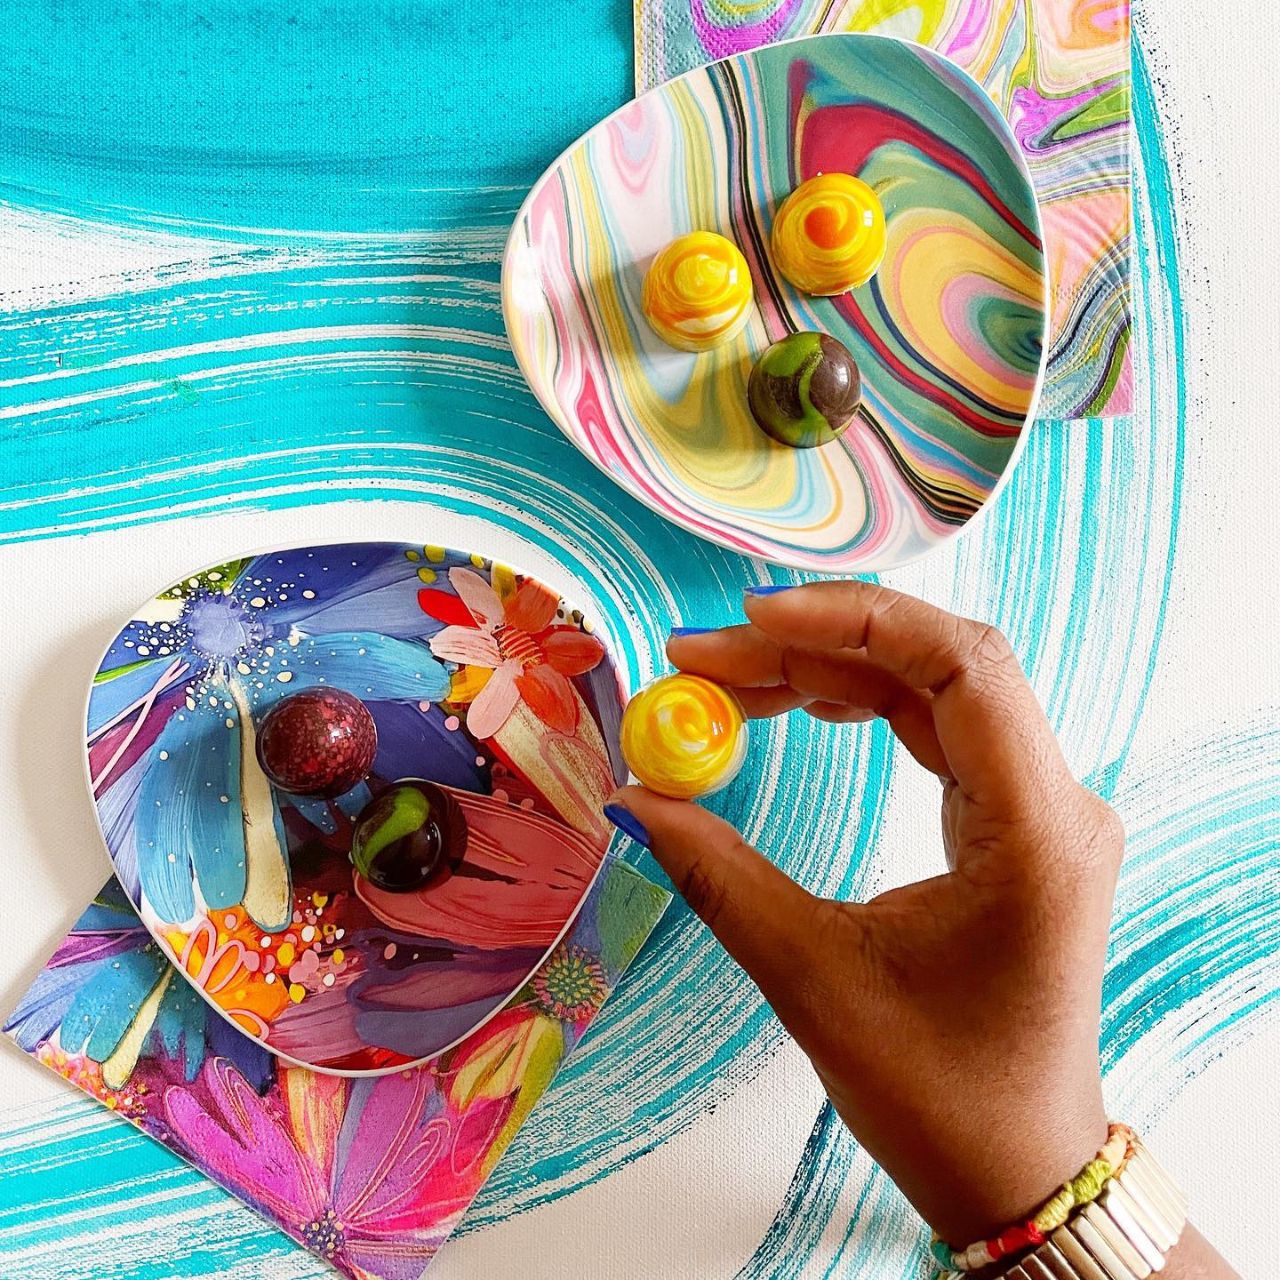 Jessi's Garden Trinket Tray by Etta Vee  Artist, designer and art influencer, Jessi Raulet, is known for her colourful and bold designs. This multi purpose tray is suitable for jewellery, keys, and more.